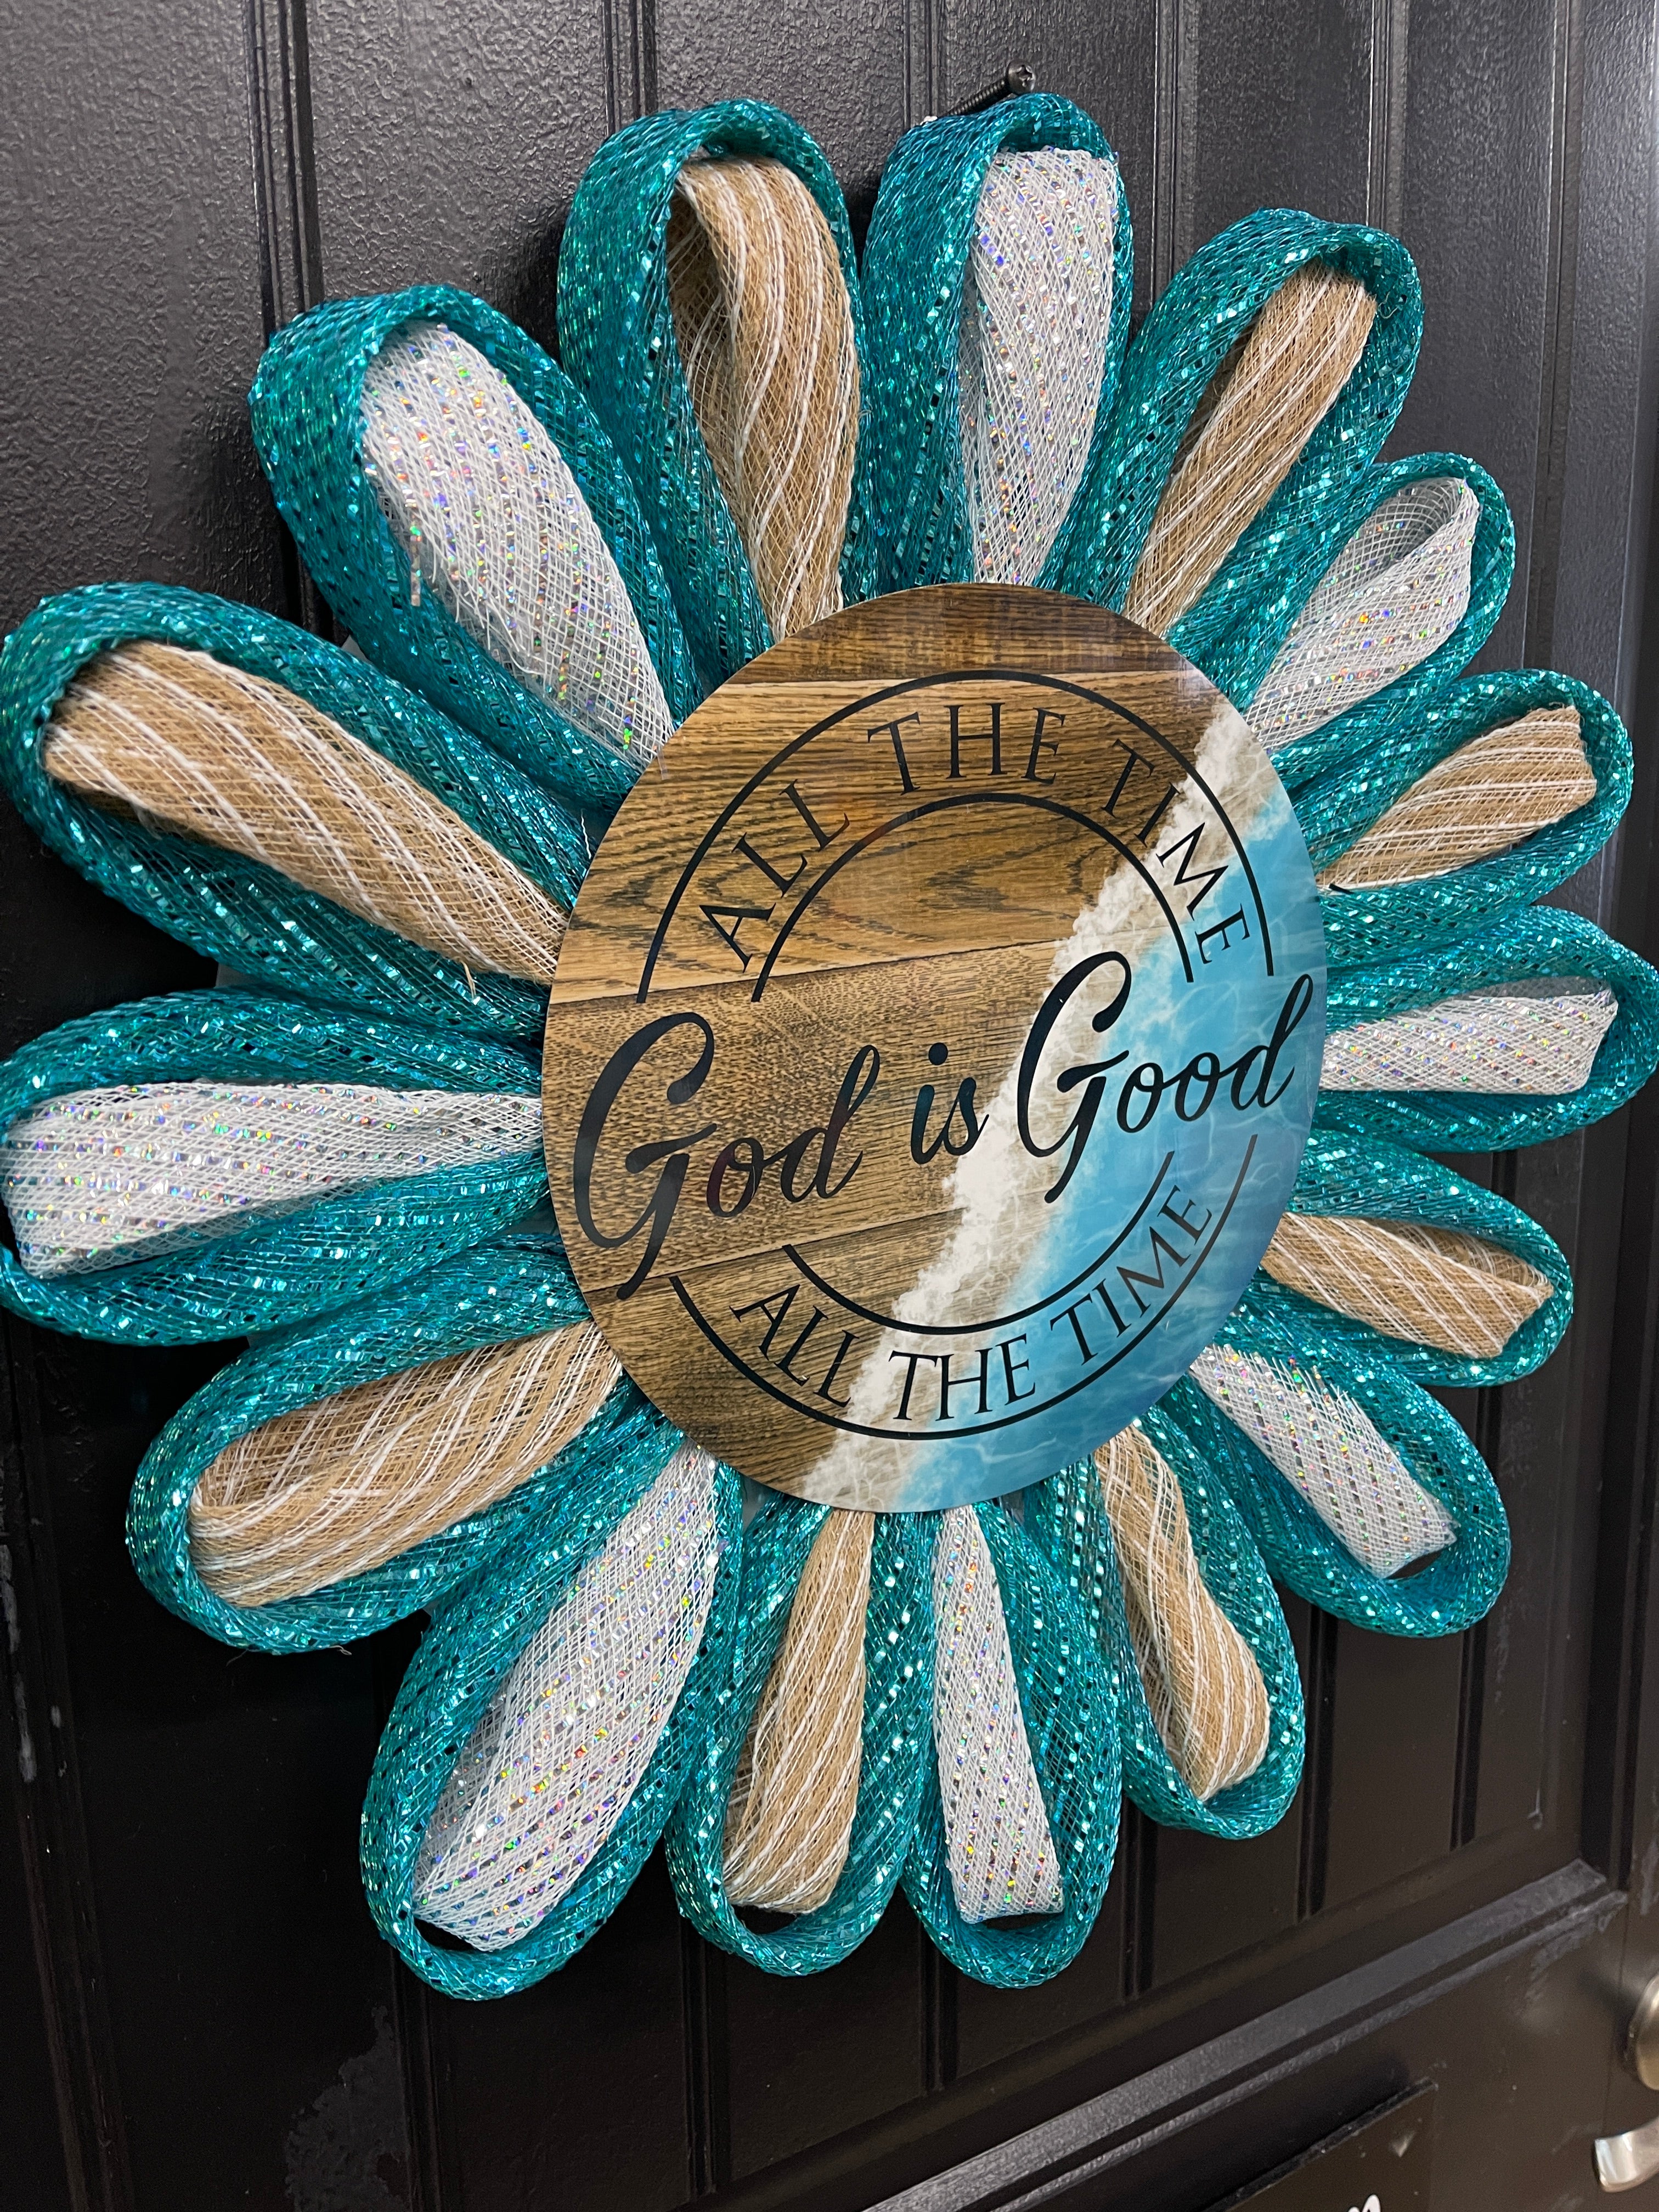 Left Side View of Teal, White and Beige Deco Mesh Daisy Chain Petal Wreath with a Sign that reads, "All the Time God is Good" on a black door.